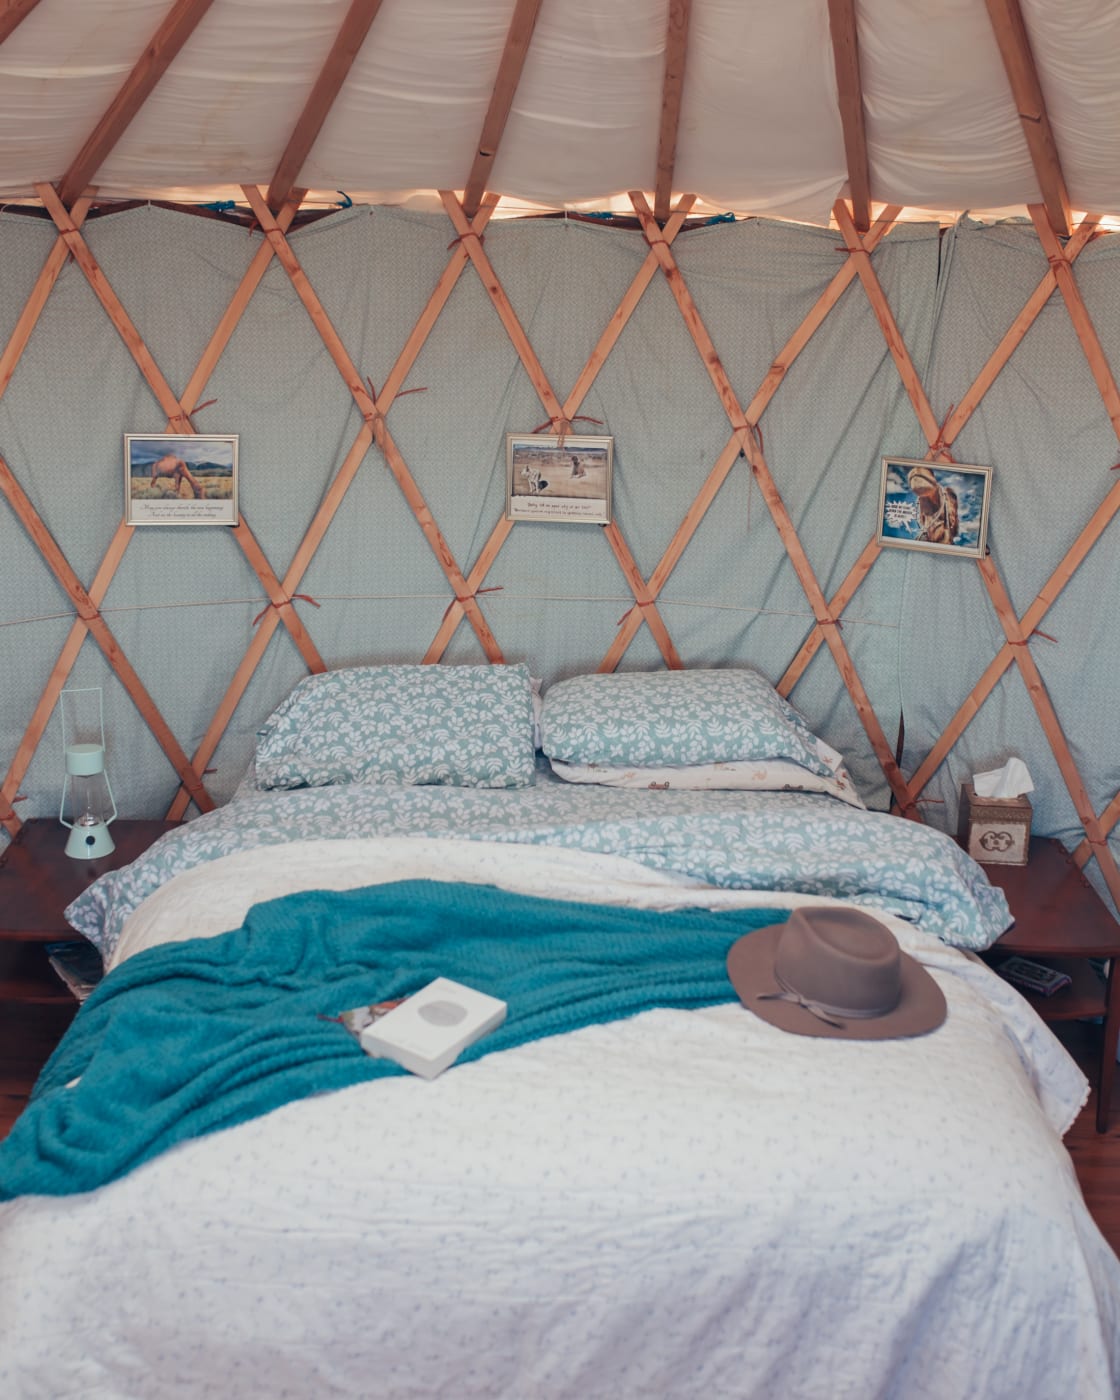 The yurt is outfitted with the comfiest queen bed imaginable with lots of blankets to keep you toasty.